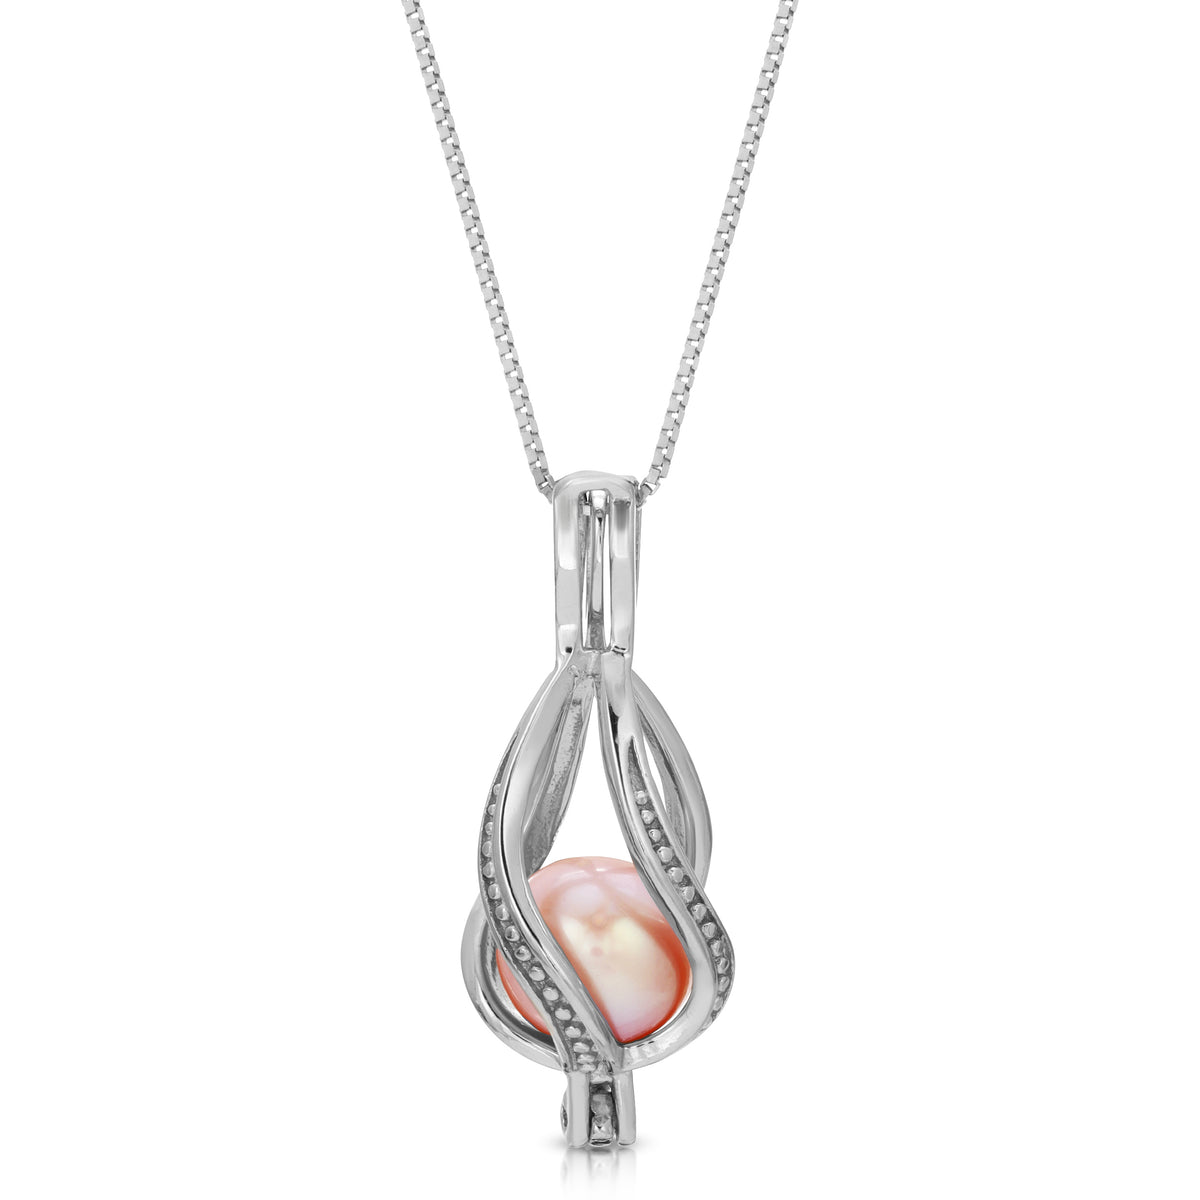 Sterling Silver Pearl Cage Pendant - Swirled Design Pearl Cage Pendant